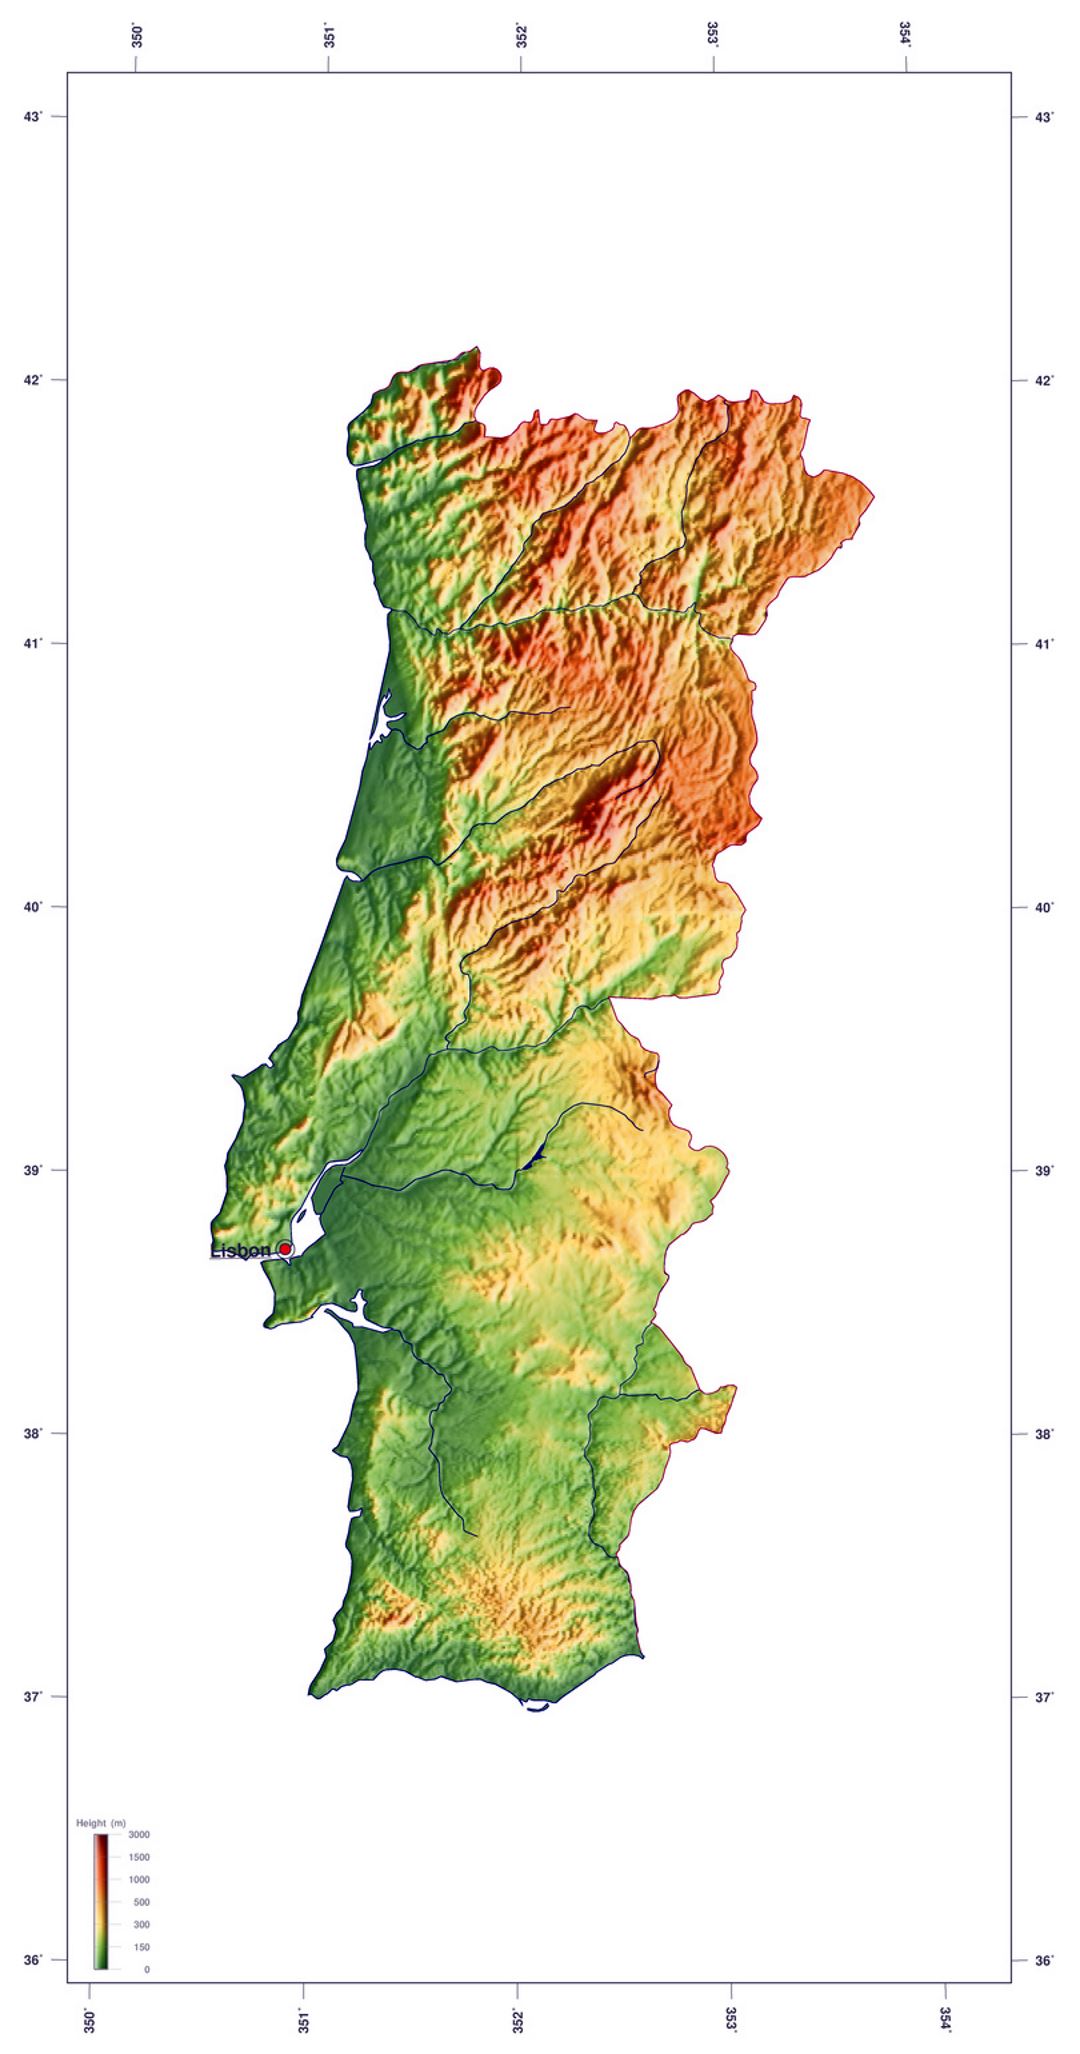 Detailed elevation map of Portugal